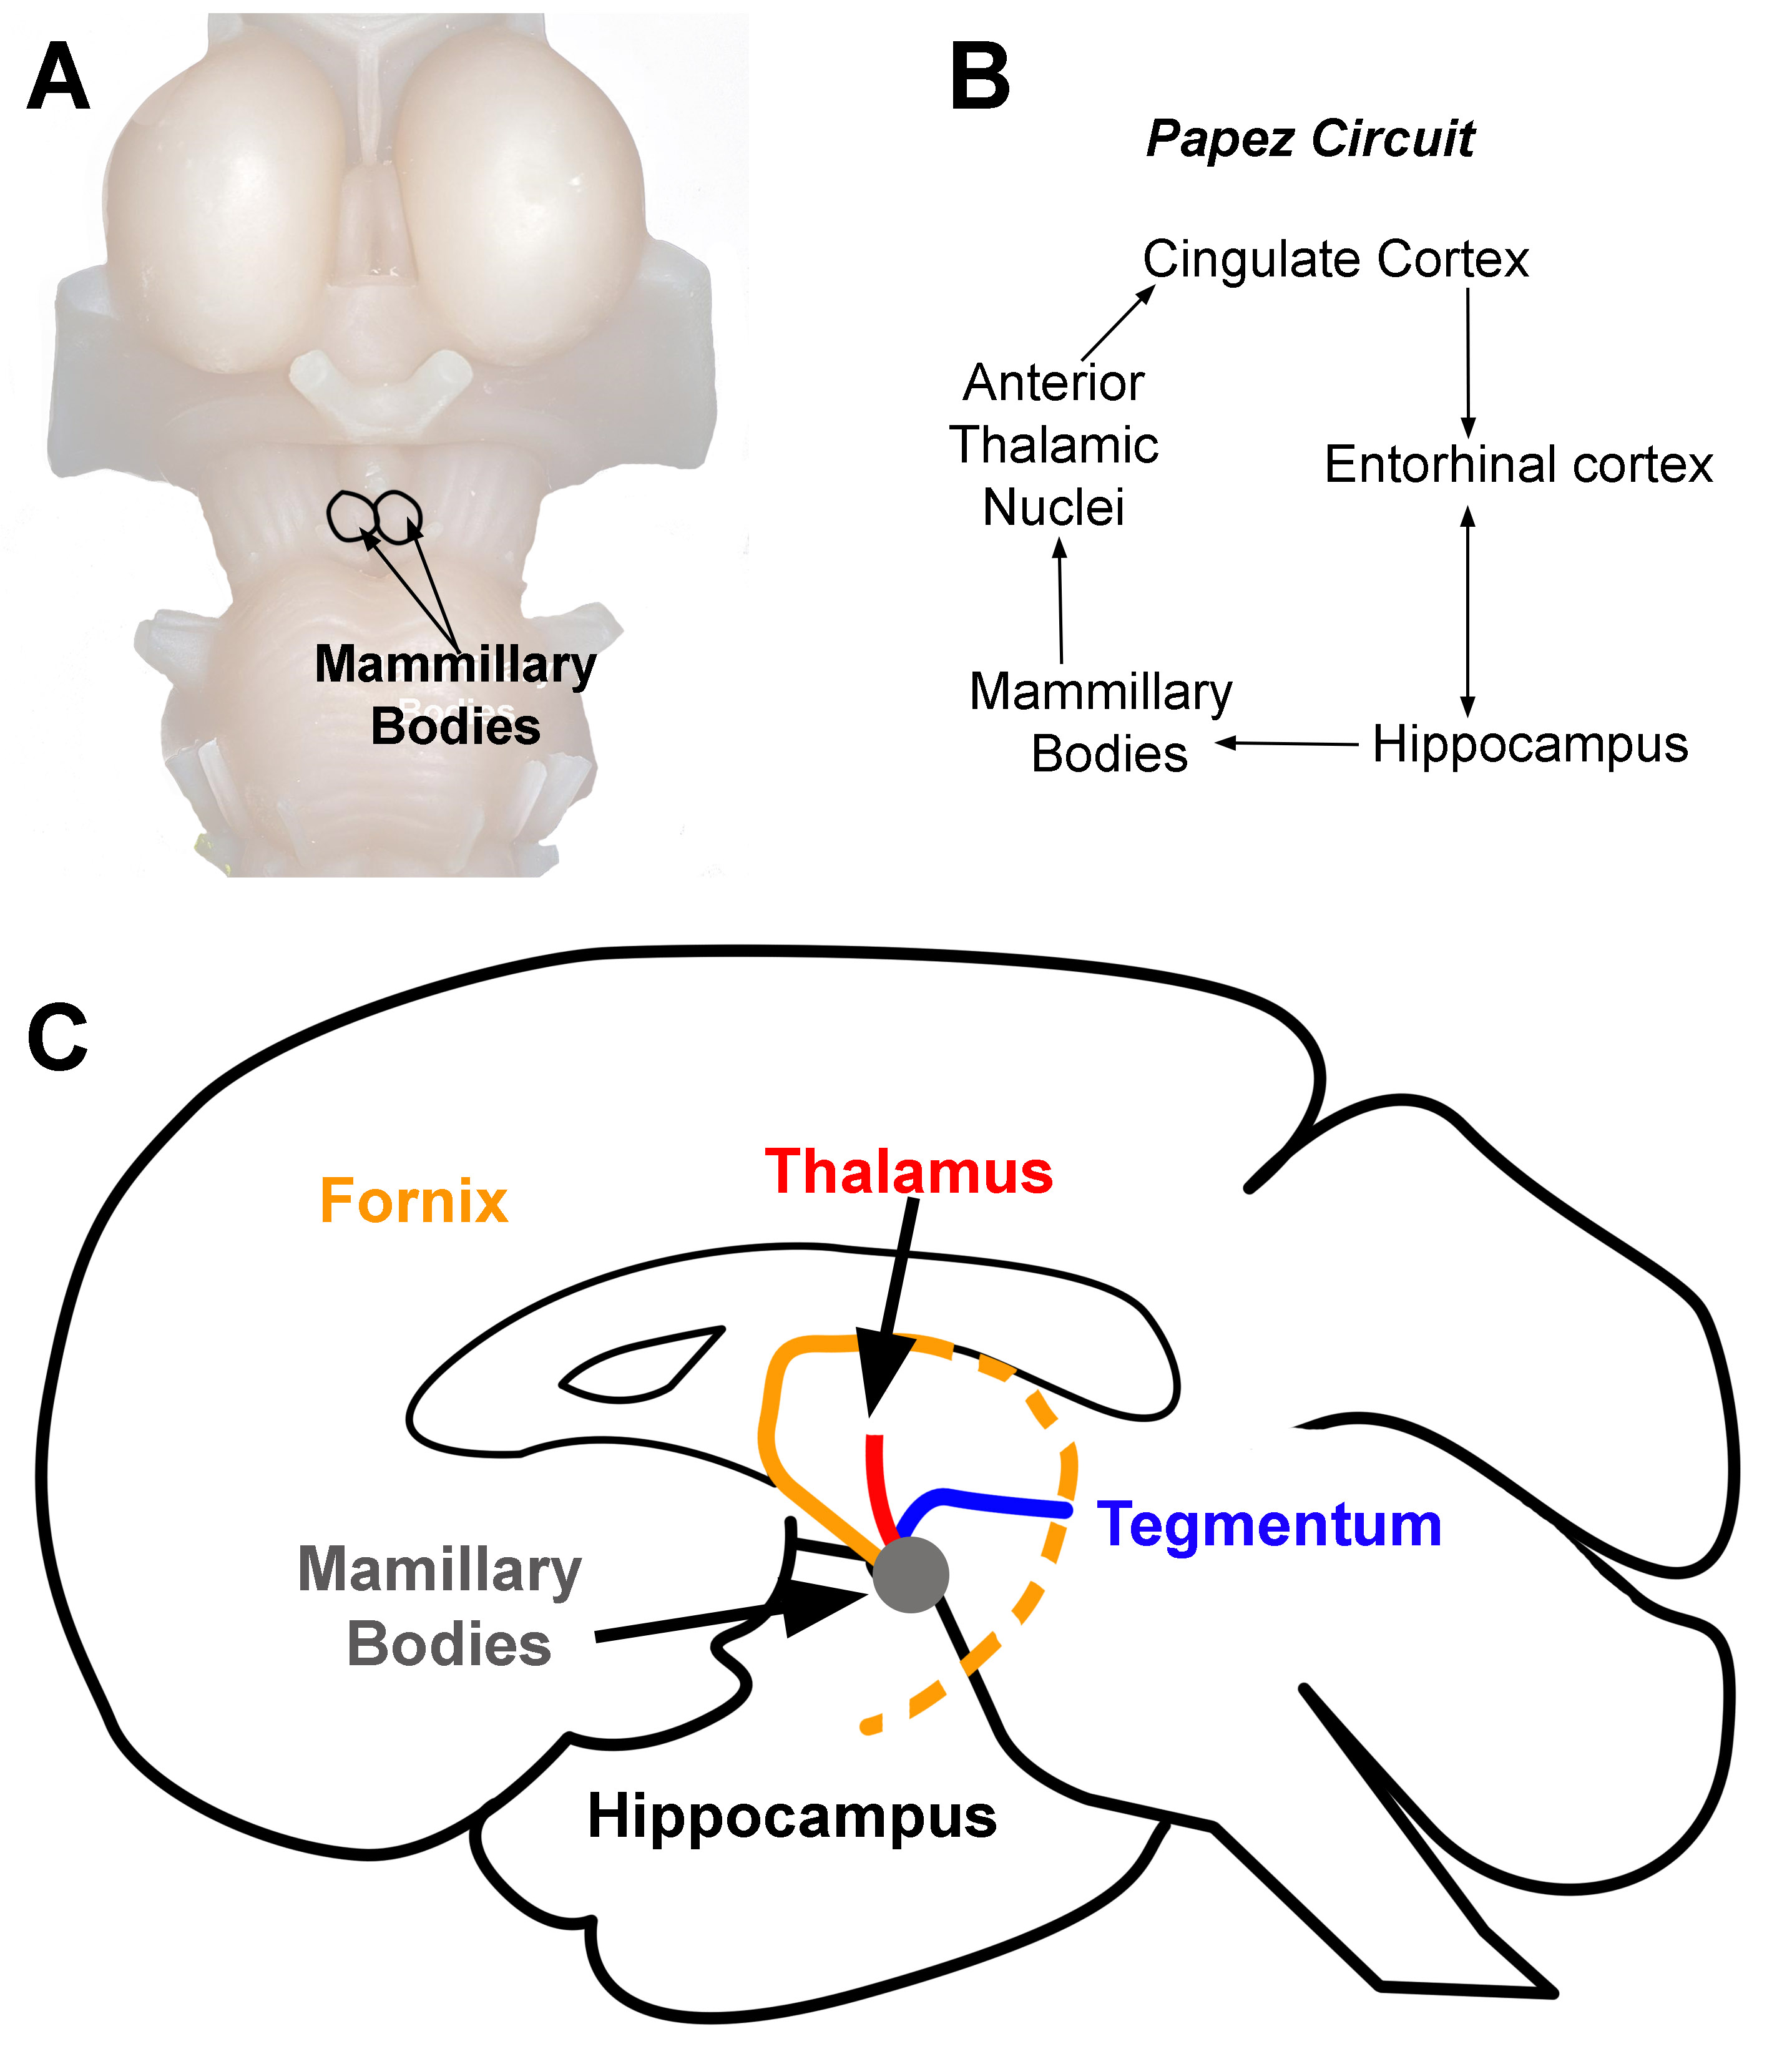 Mammillary Bodies. A. Location of mammillary bodies on the brainstem. B. Papez circuit. Arrows indicate the direction of information flow. C. Connections of the mammillary bodies (grey area). The three primary connections of the mammillary bodies  are from: 1) the hippocampus to the mammillary bodies (orange line). This pathway is the fornix. 2) the mammillary bodies to the thalamus (red line), and 3) the mammillary bodies to and from the tegmentum (blue line). 